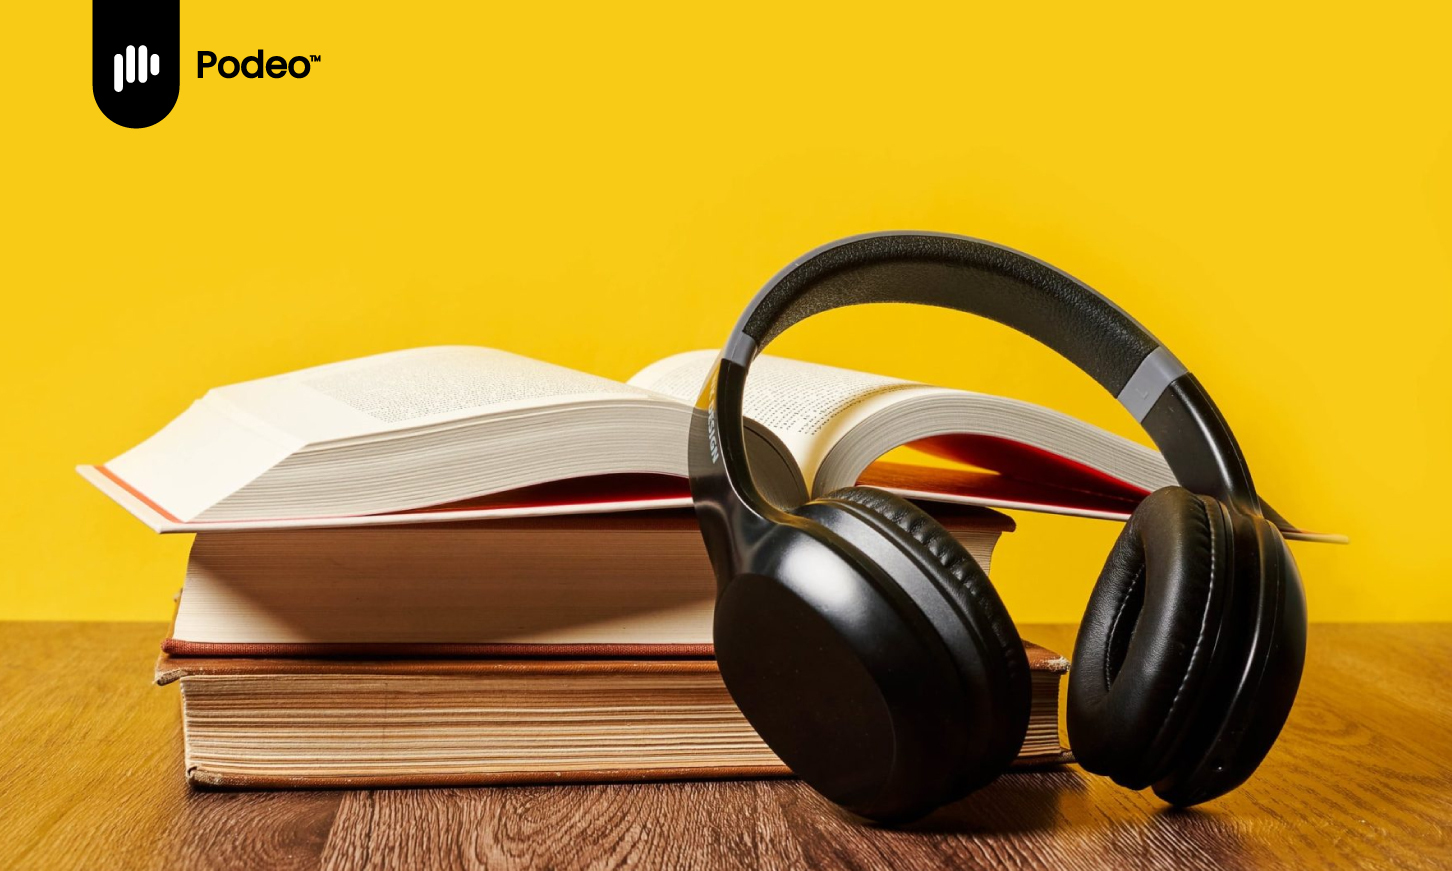 headphones on a book, on a yellow background